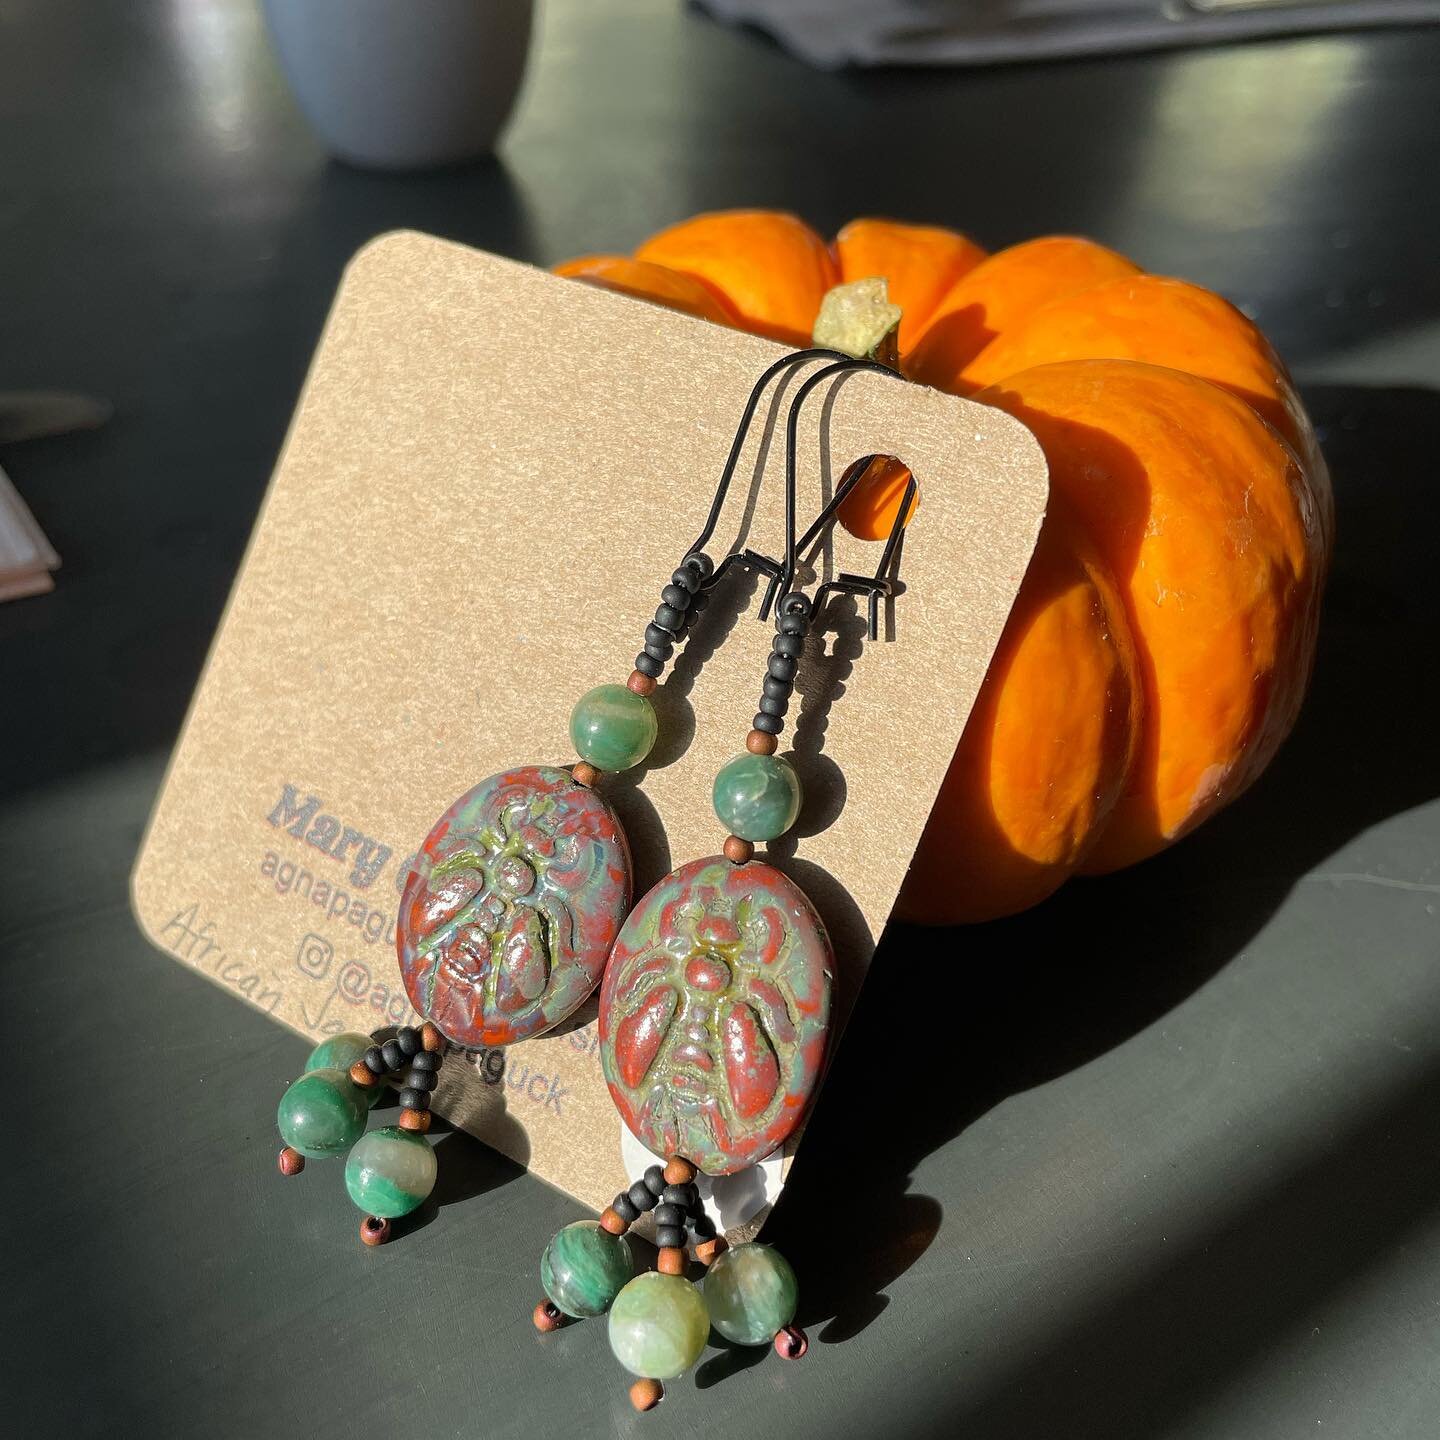 Look at what one of our favorite customers makes!

Mary is a local Athabaskan artist who&rsquo;s amazing beadwork jewelry we have on display here at Wild Honey. She creates everyday accessories, repurposed treasures and local botanicals with a whimsi